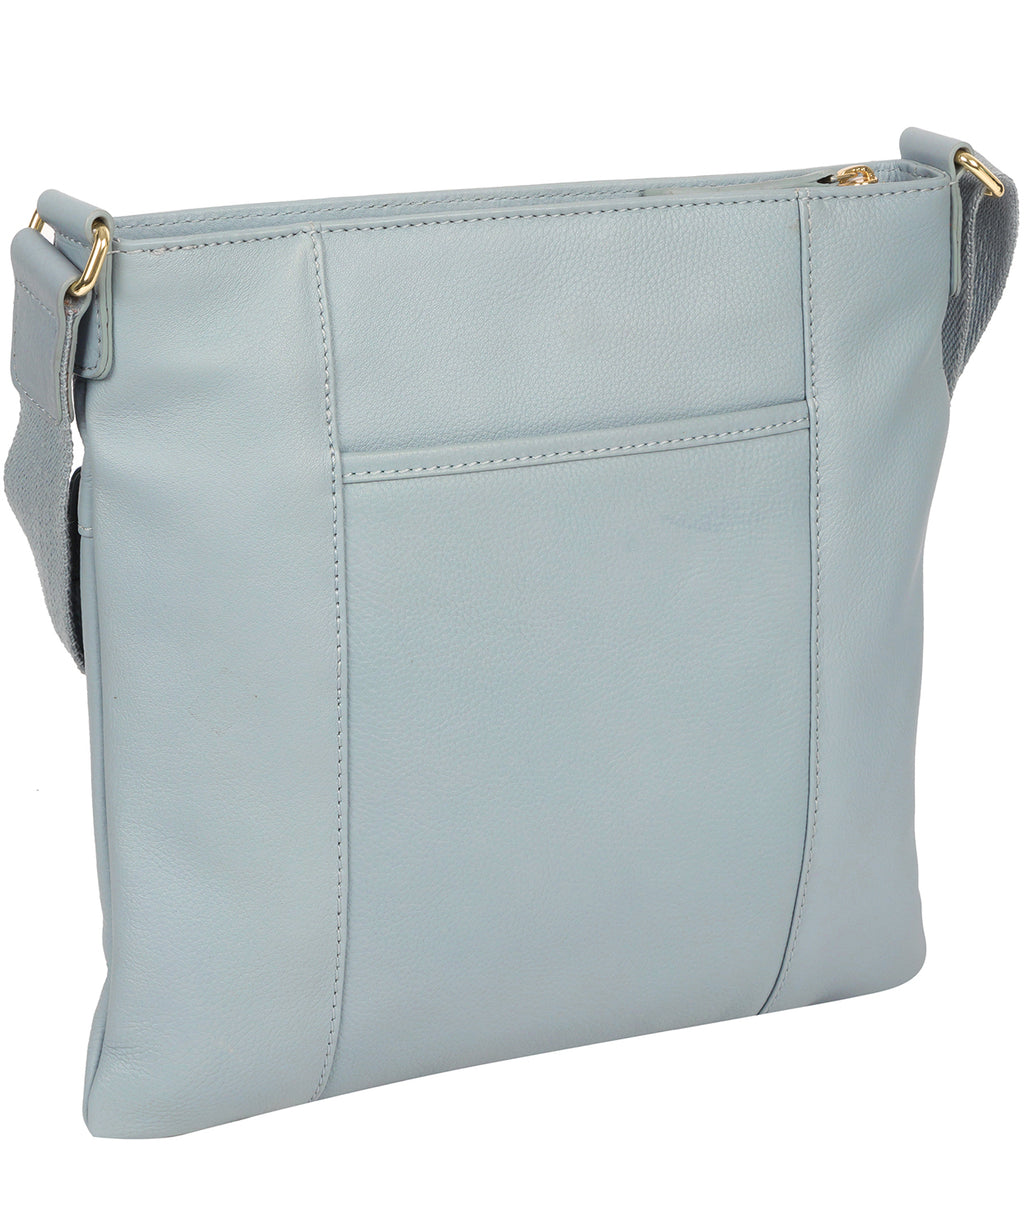 Blue Leather Crossbody Bag 'Soames' by Pure Luxuries – Pure Luxuries London